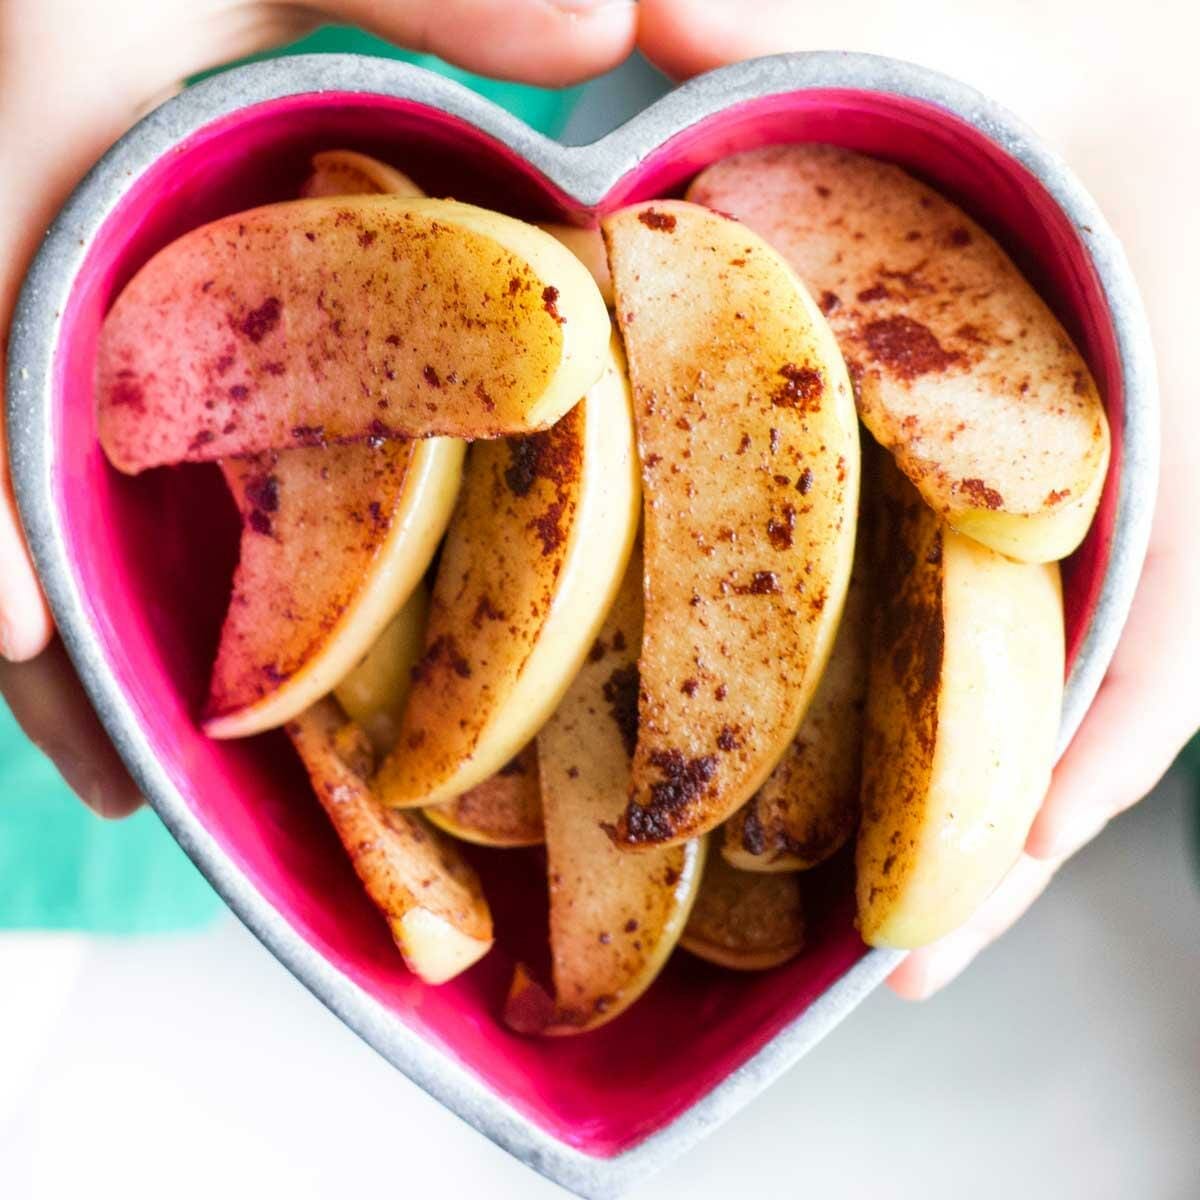 A Symphony Of Flavors: Cinnamon-Coated Apple Slices Ready For The Microwave.